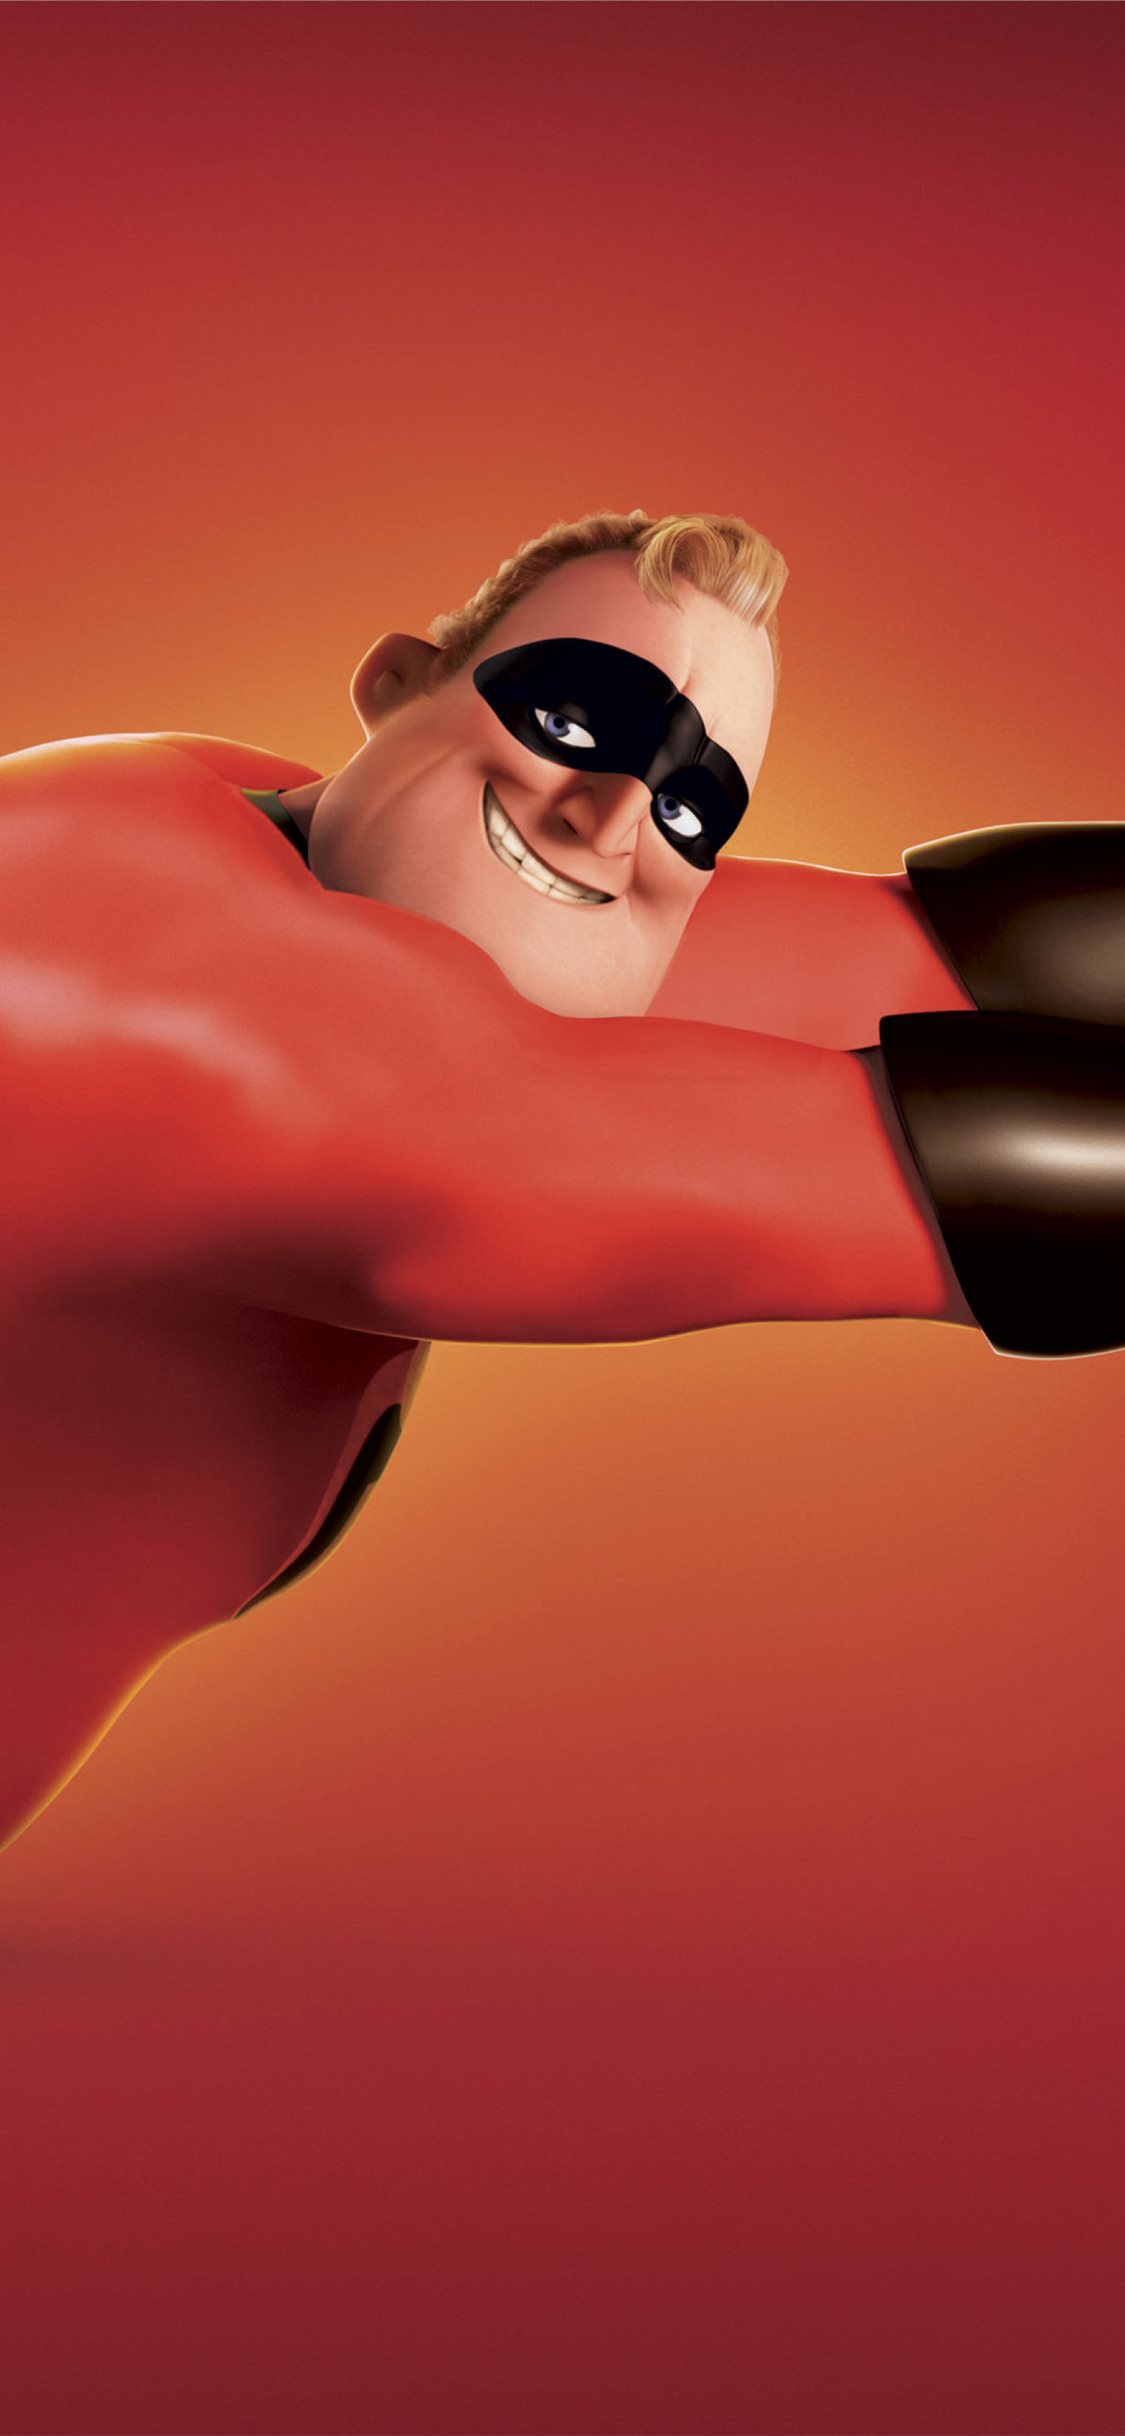 Best The incredibles 2 iPhone X HD Wallpapers - iLikeWallpaper